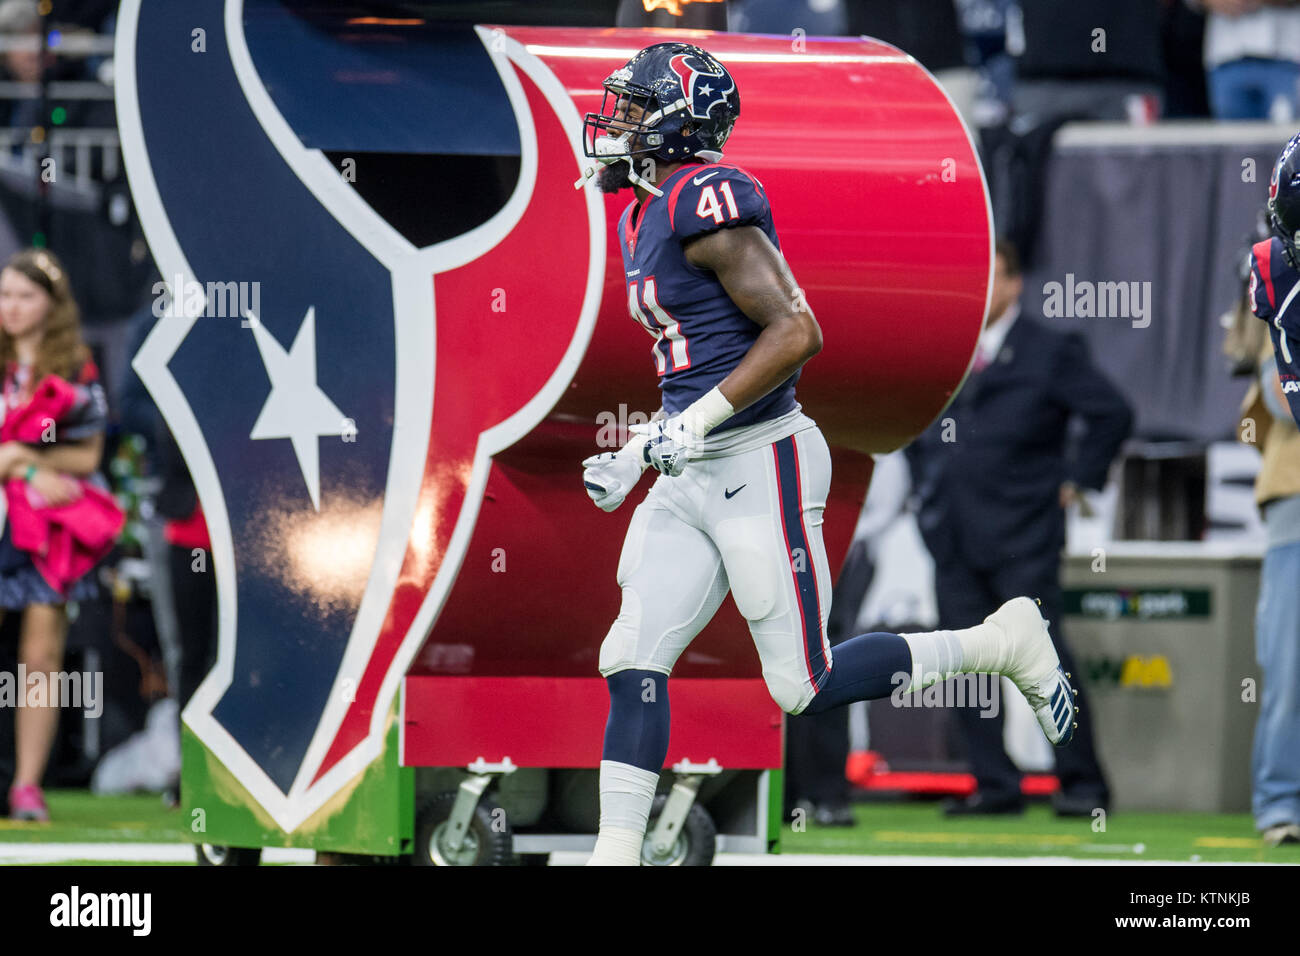 Houston, TX, USA. 25th Dec, 2017. Houston Texans inside linebacker Zach Cunningham (41) enters the field prior to an NFL football game between the Houston Texans and the Pittsburgh Steelers at NRG Stadium in Houston, TX. The Steelers won the game 34 to 6.Trask Smith/CSM/Alamy Live News Stock Photo